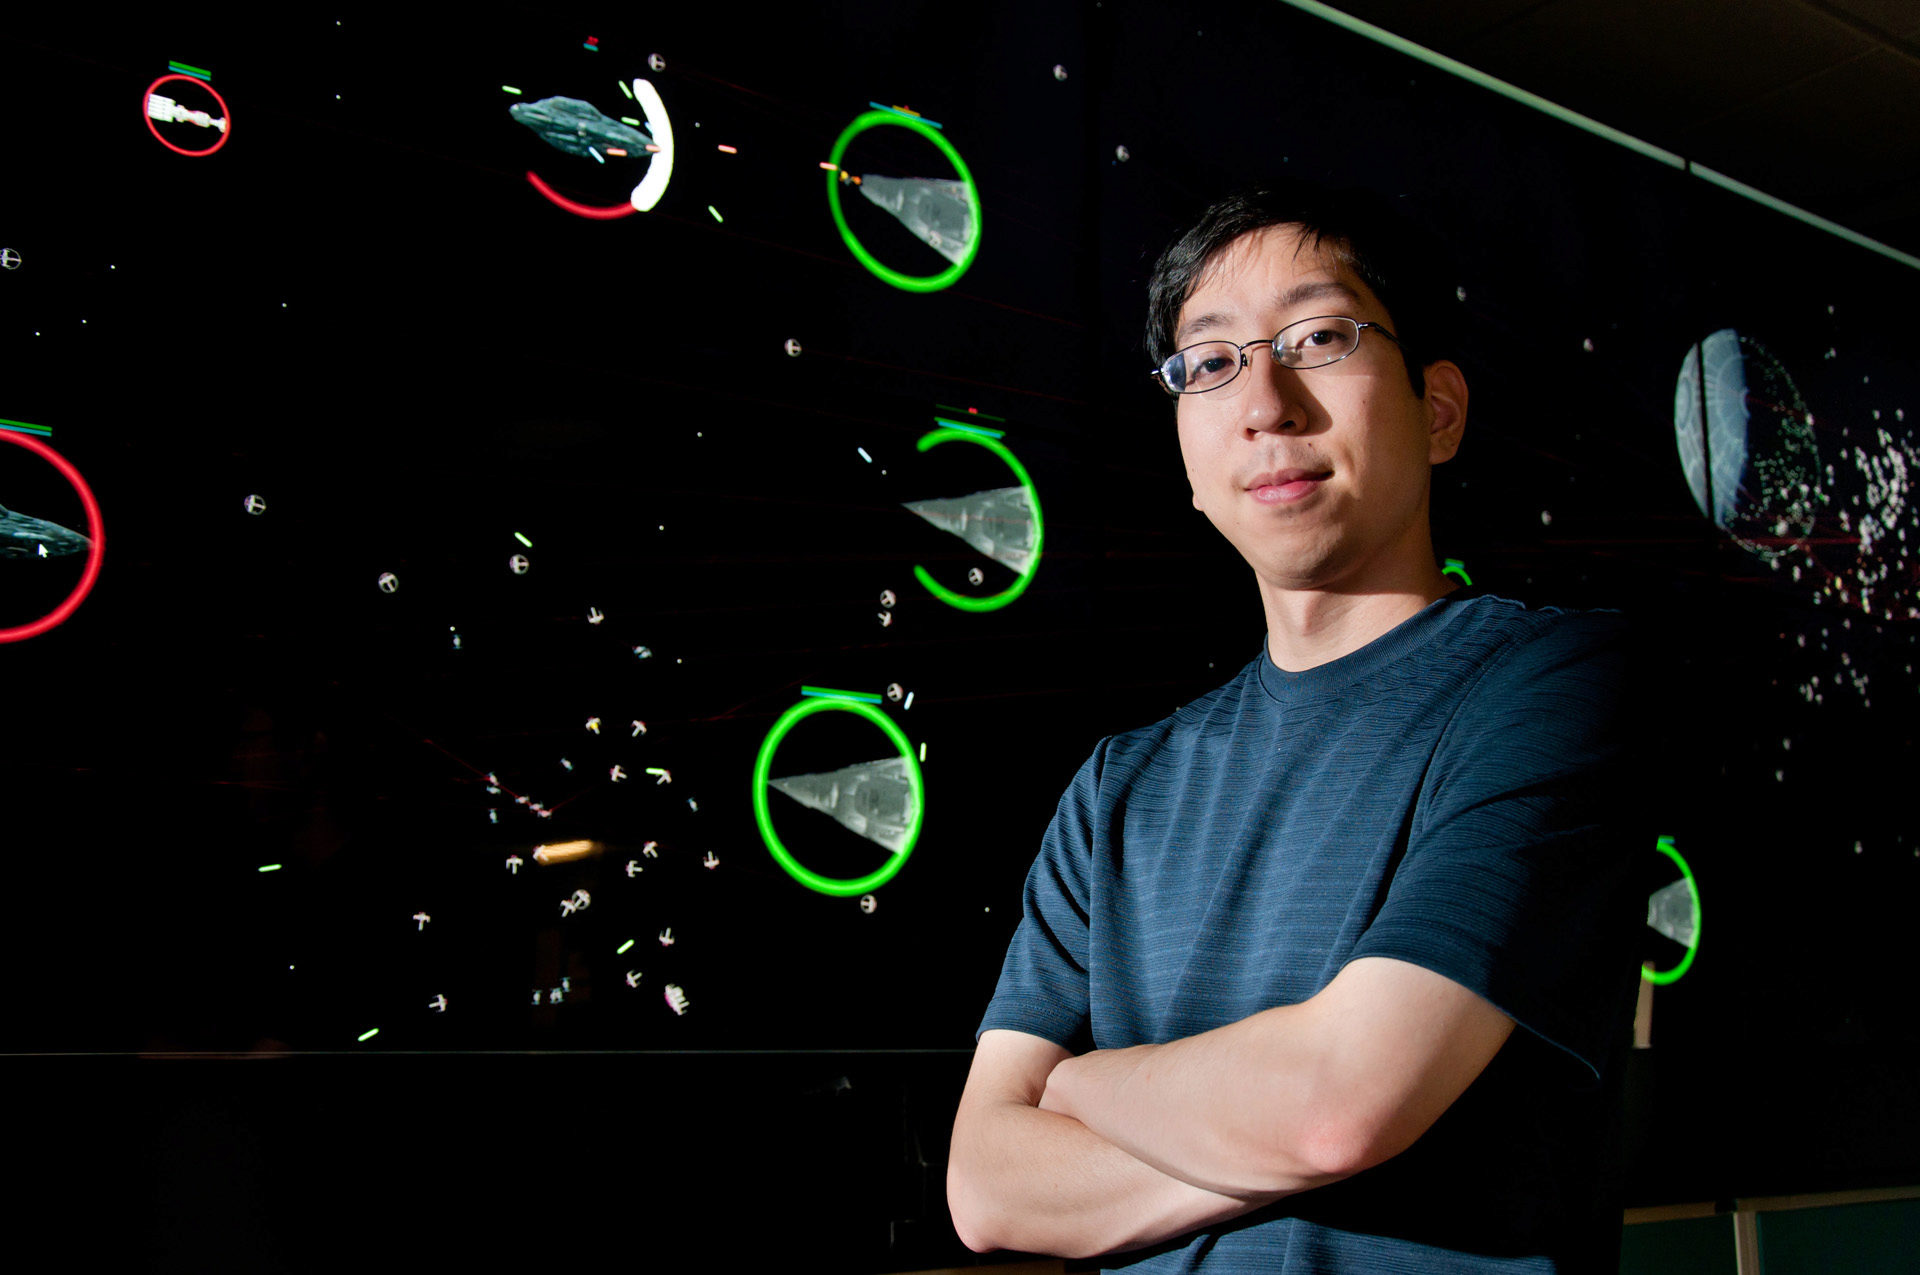 Arthur Nishimoto stands in front of EVL’s Cyber-Commons that is running his video game &ldquo;Fleet Commander,&rdquo; an homage to the epic battles in Star Wars&rsquo; Return of the Jedi.